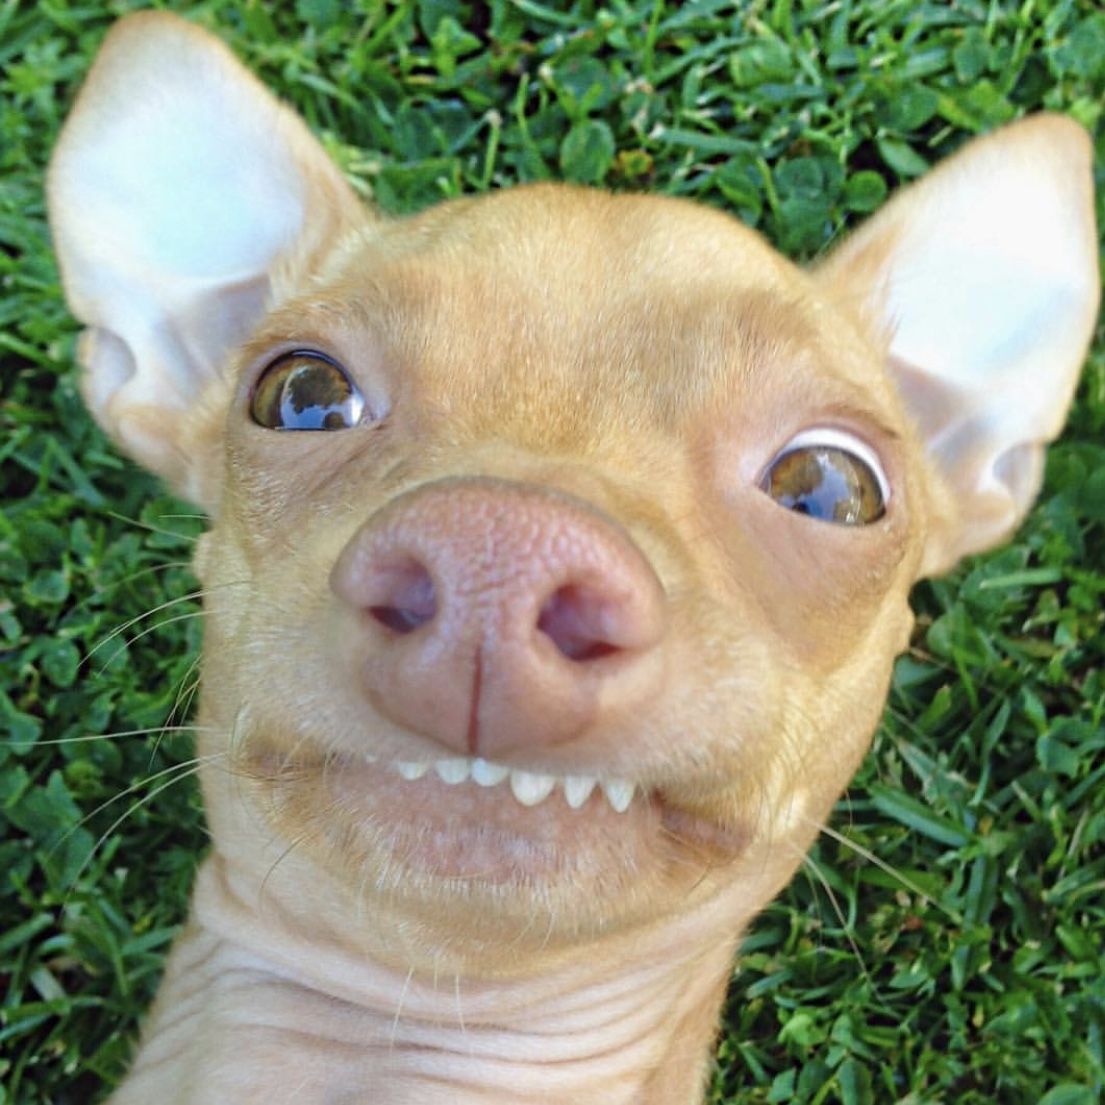 22 Animal Instagram Accounts You Have to Follow - Cute Animal Photos